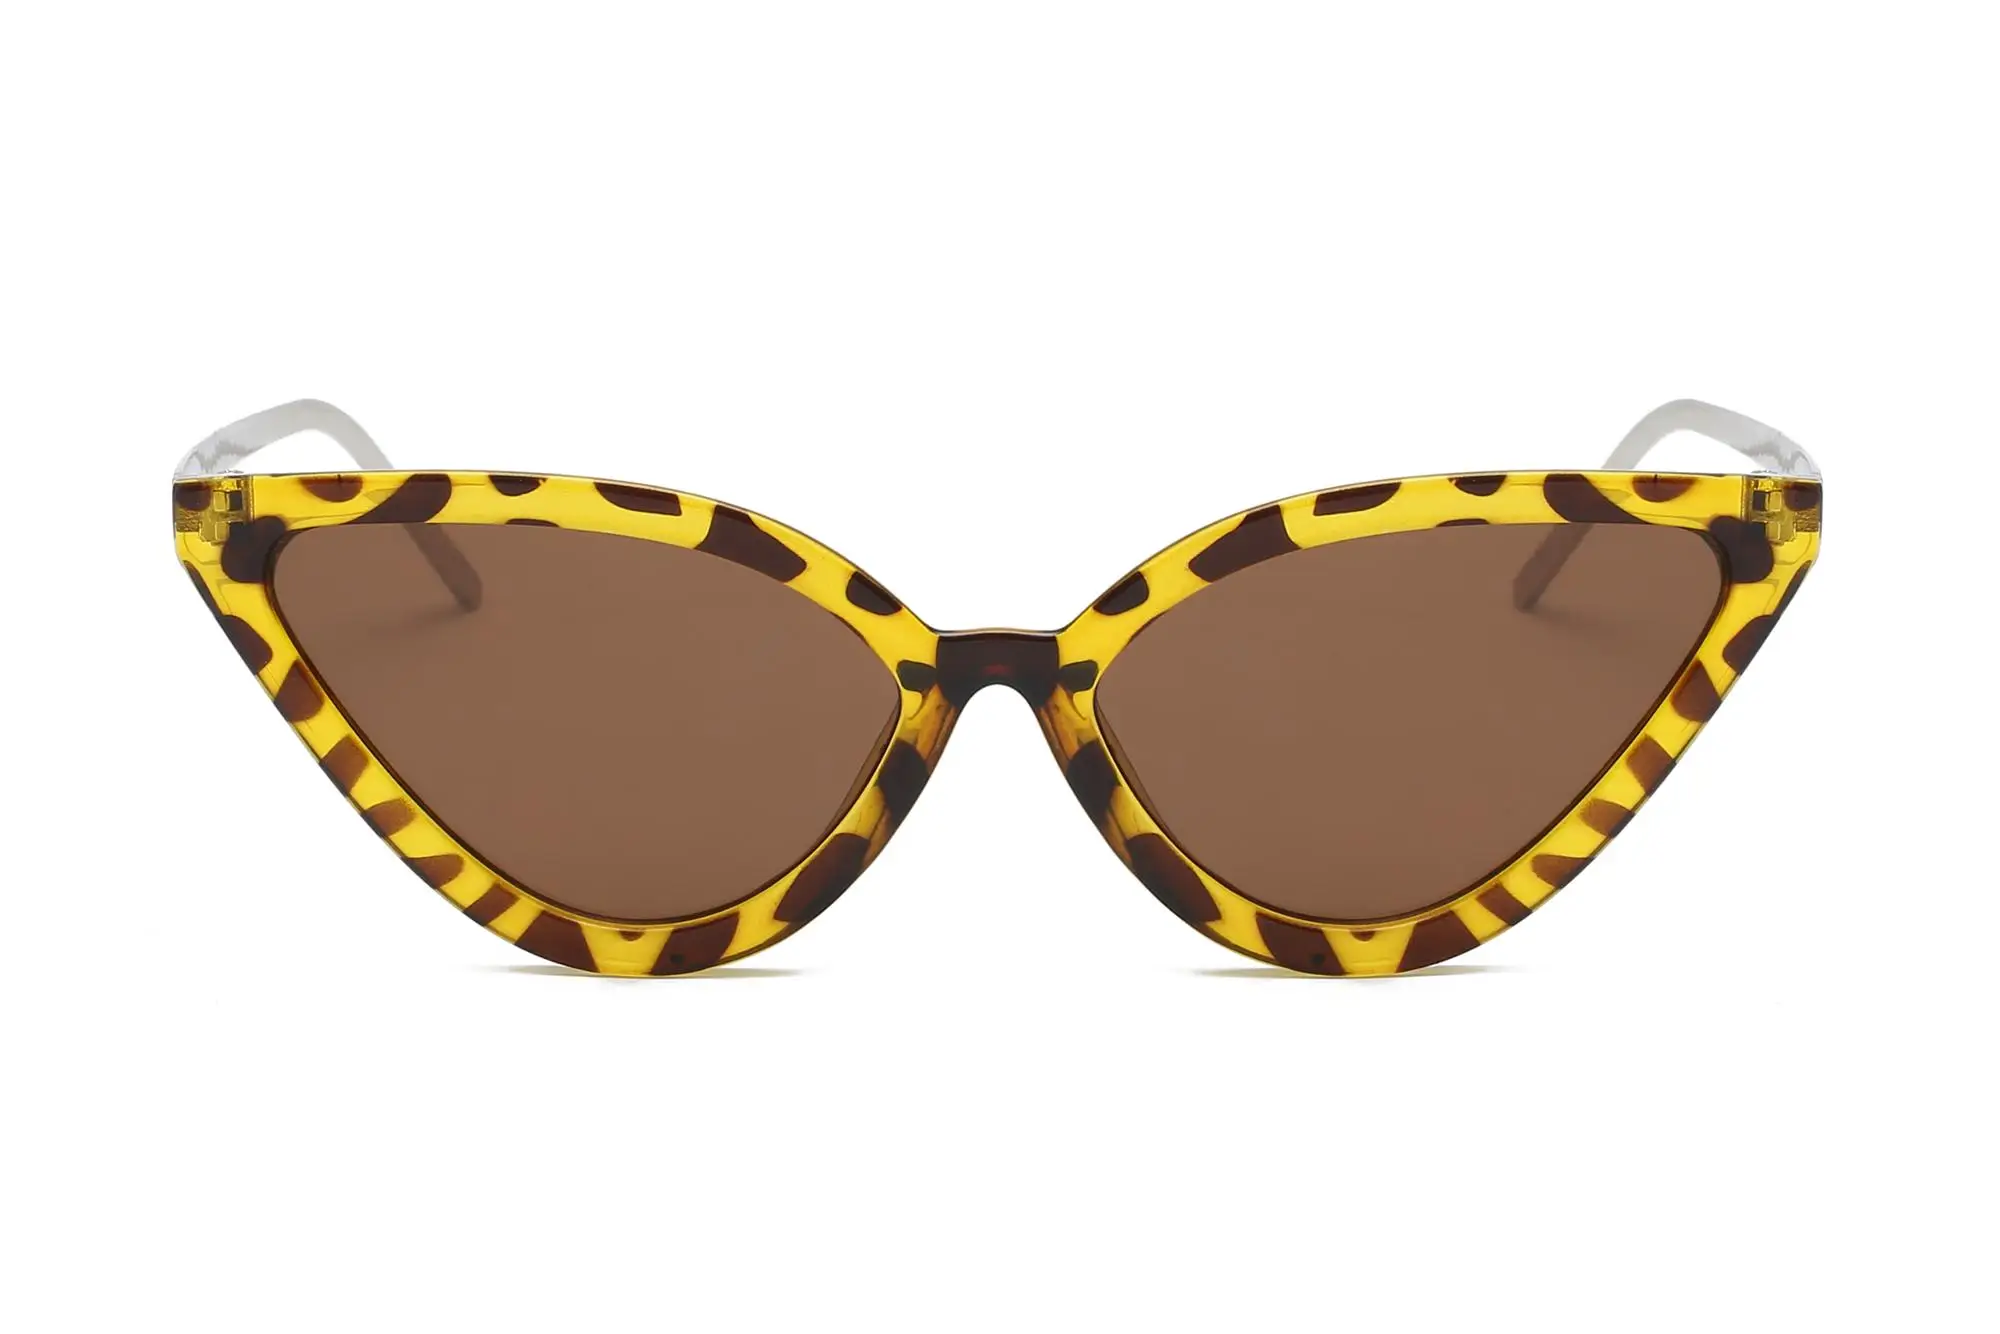 Eugenia square cat eye sunglasses from China for Travel-11